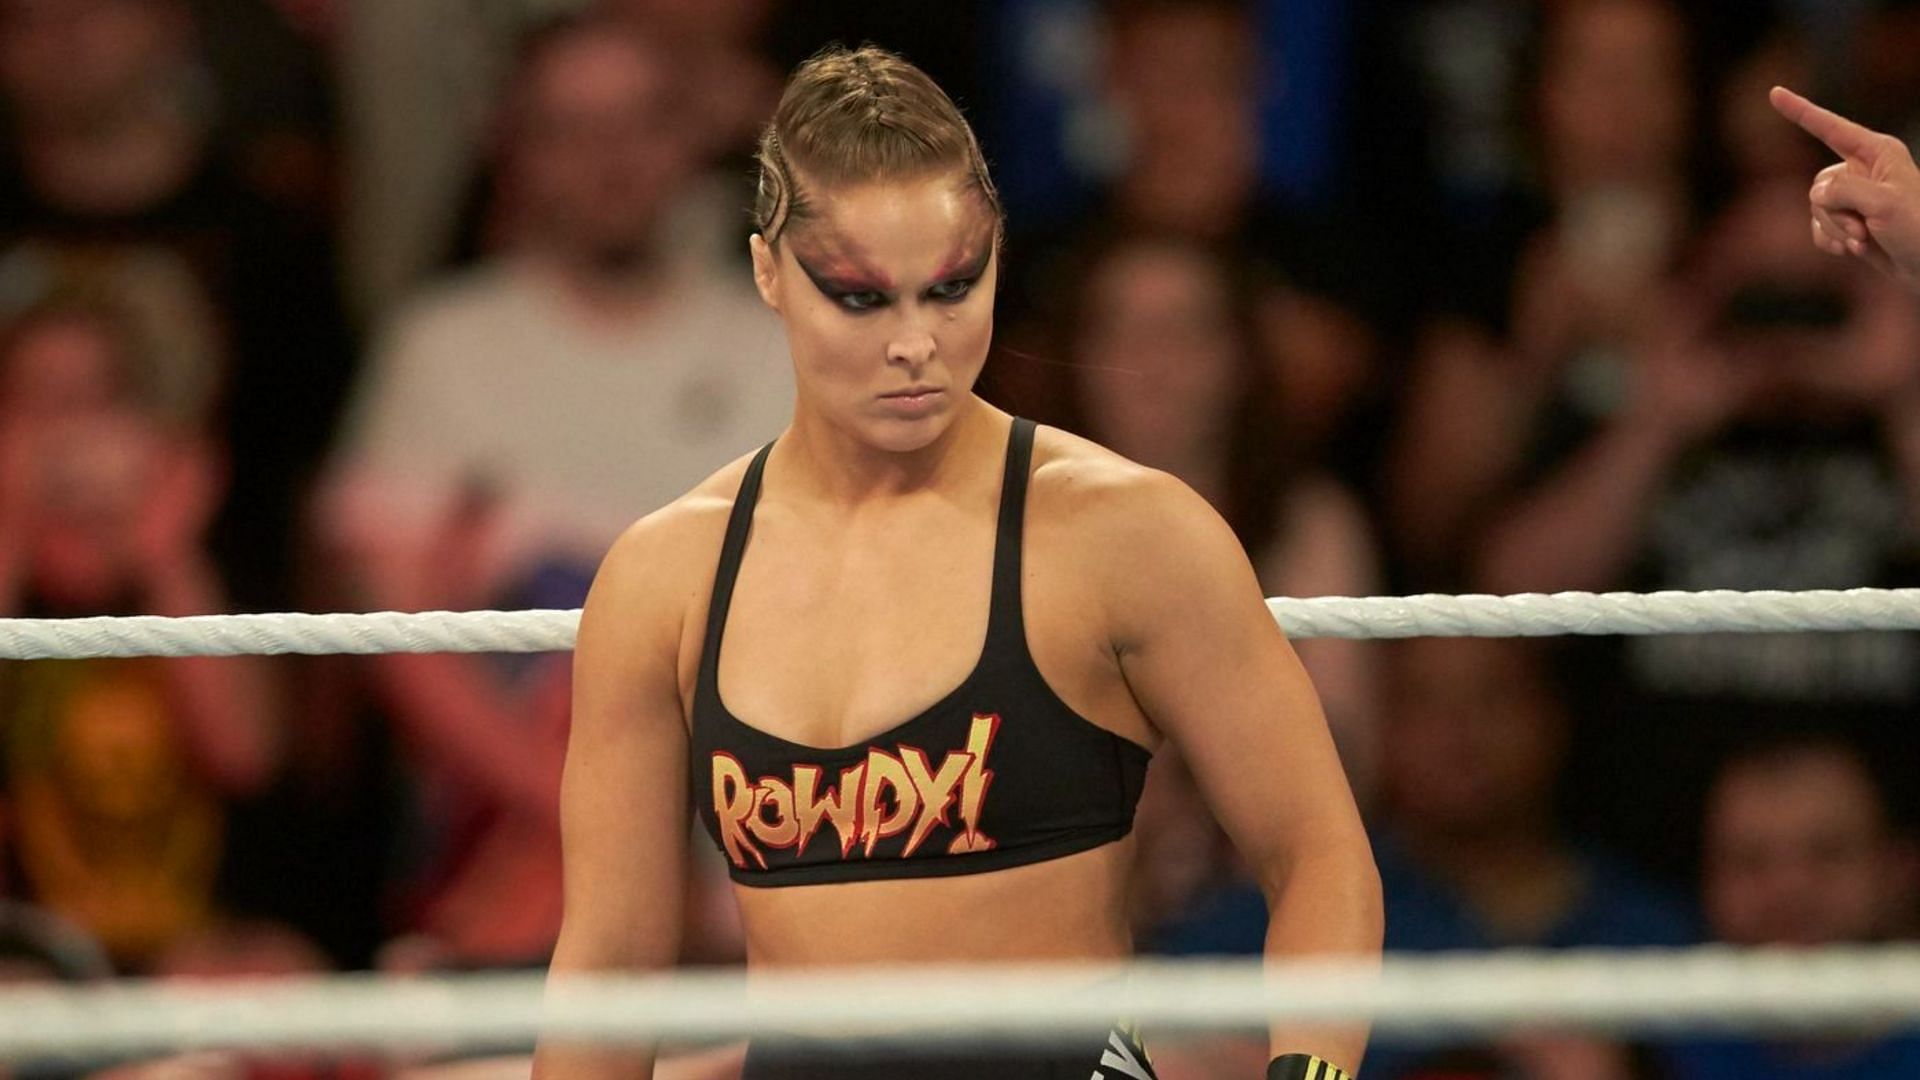 Ronda Rousey appeared at Extreme Rules 2018